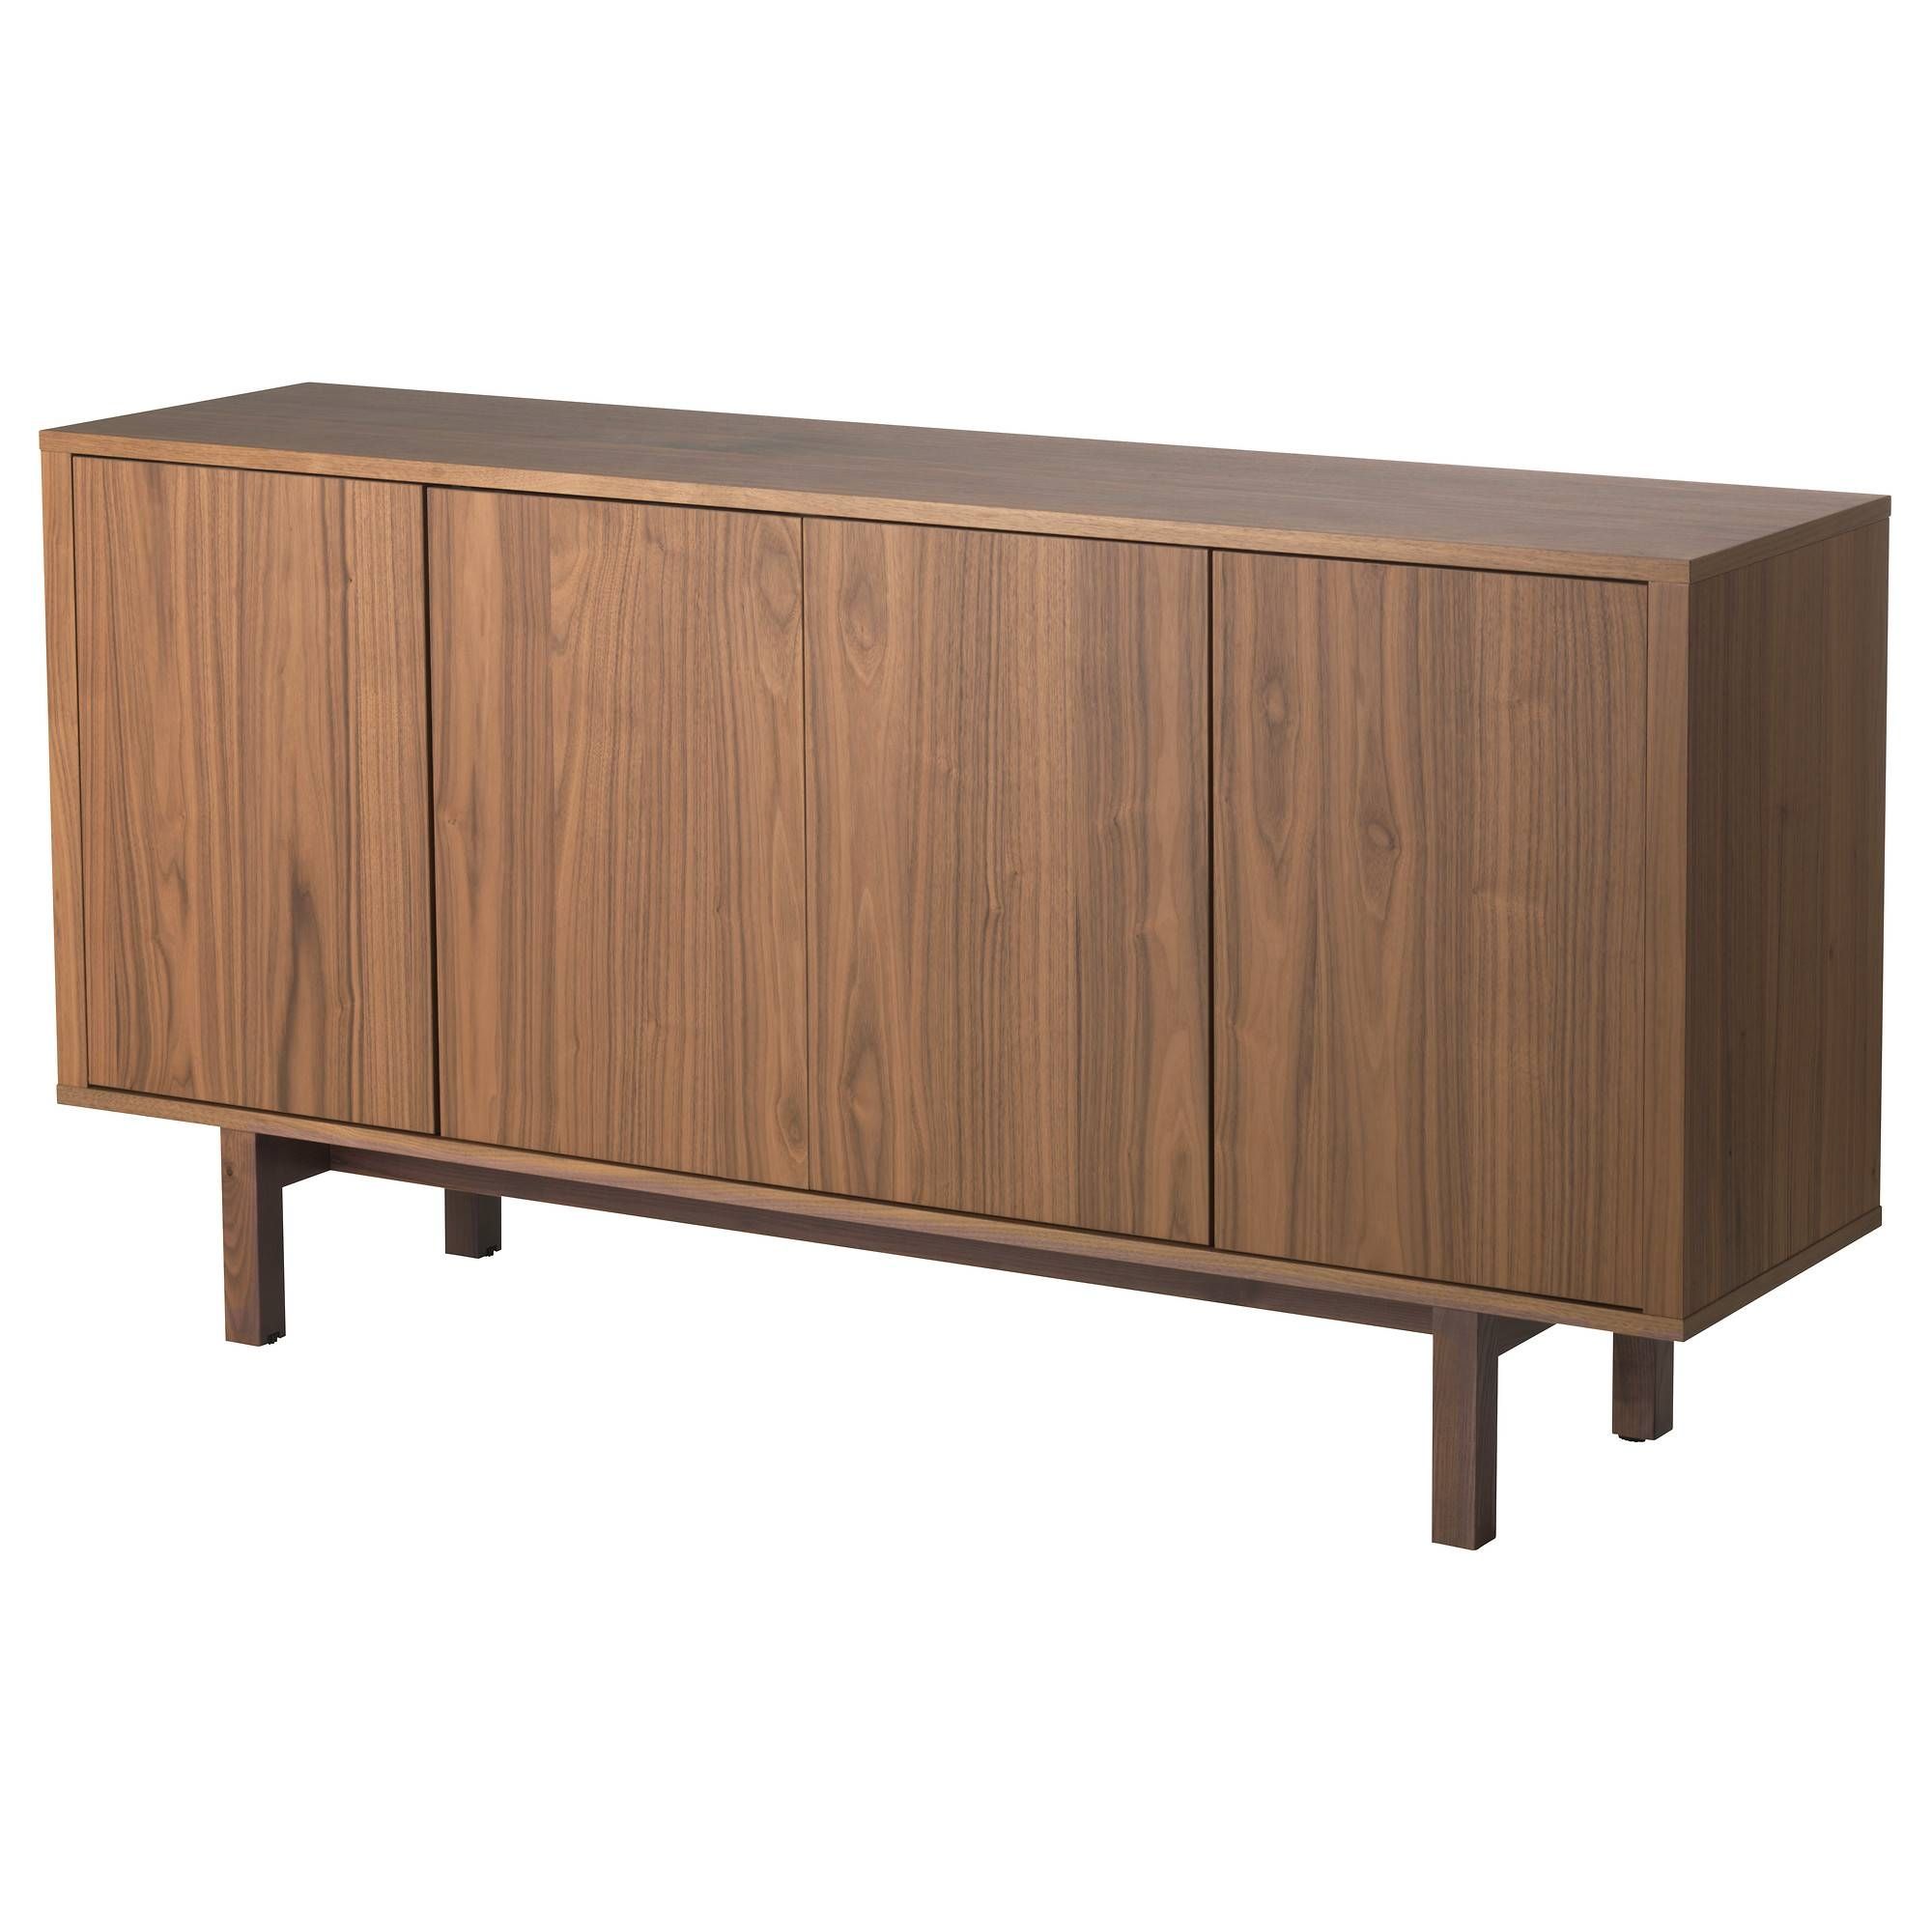 Buffet Tables & Sideboards – Ikea For Best And Newest 48 Inch Sideboards (View 11 of 15)